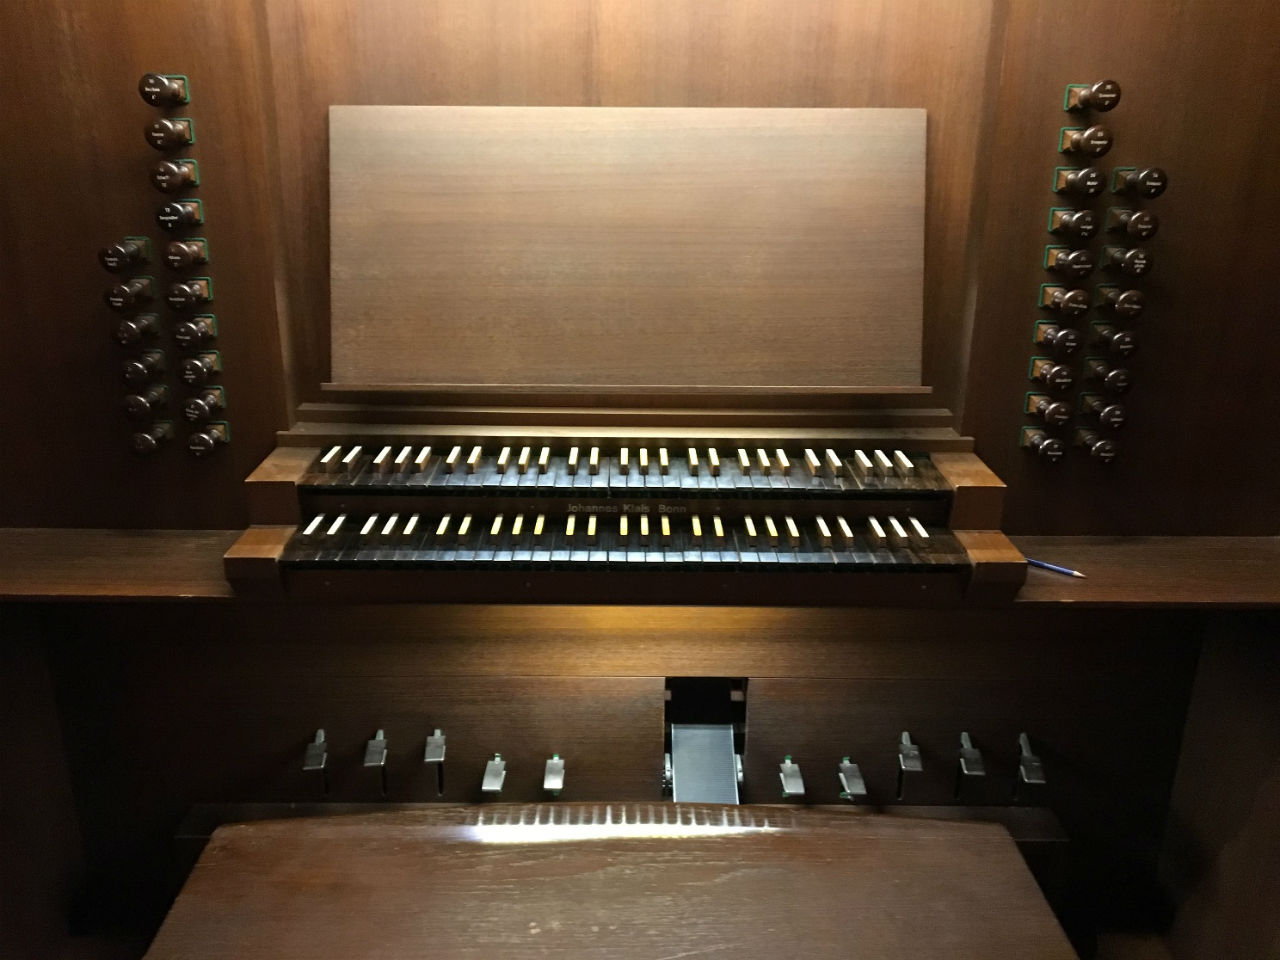 Console of the Victoria Concert Hall organ